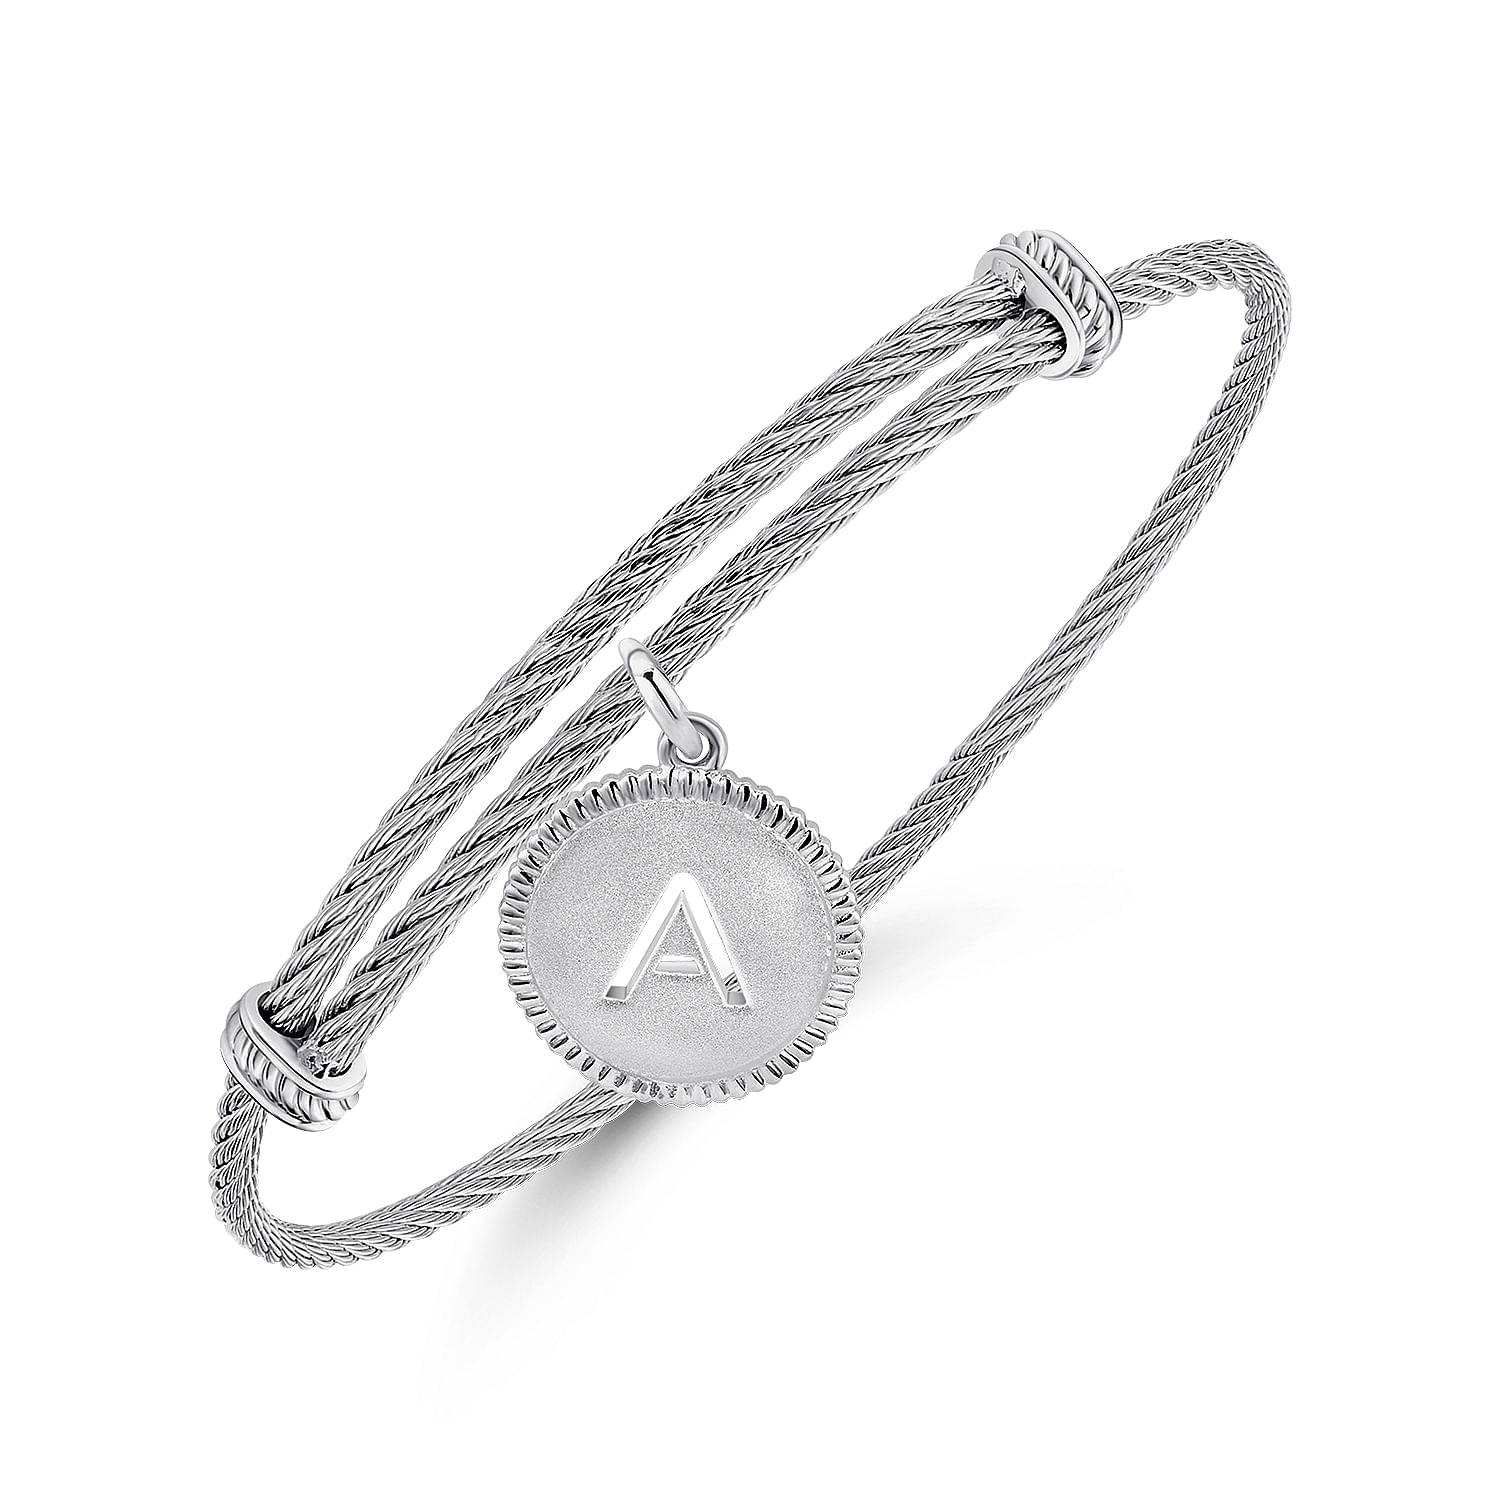 Adjustable Twisted Cable Stainless Steel Bangle with Sterling Silver A Initial Charm - Shot 2